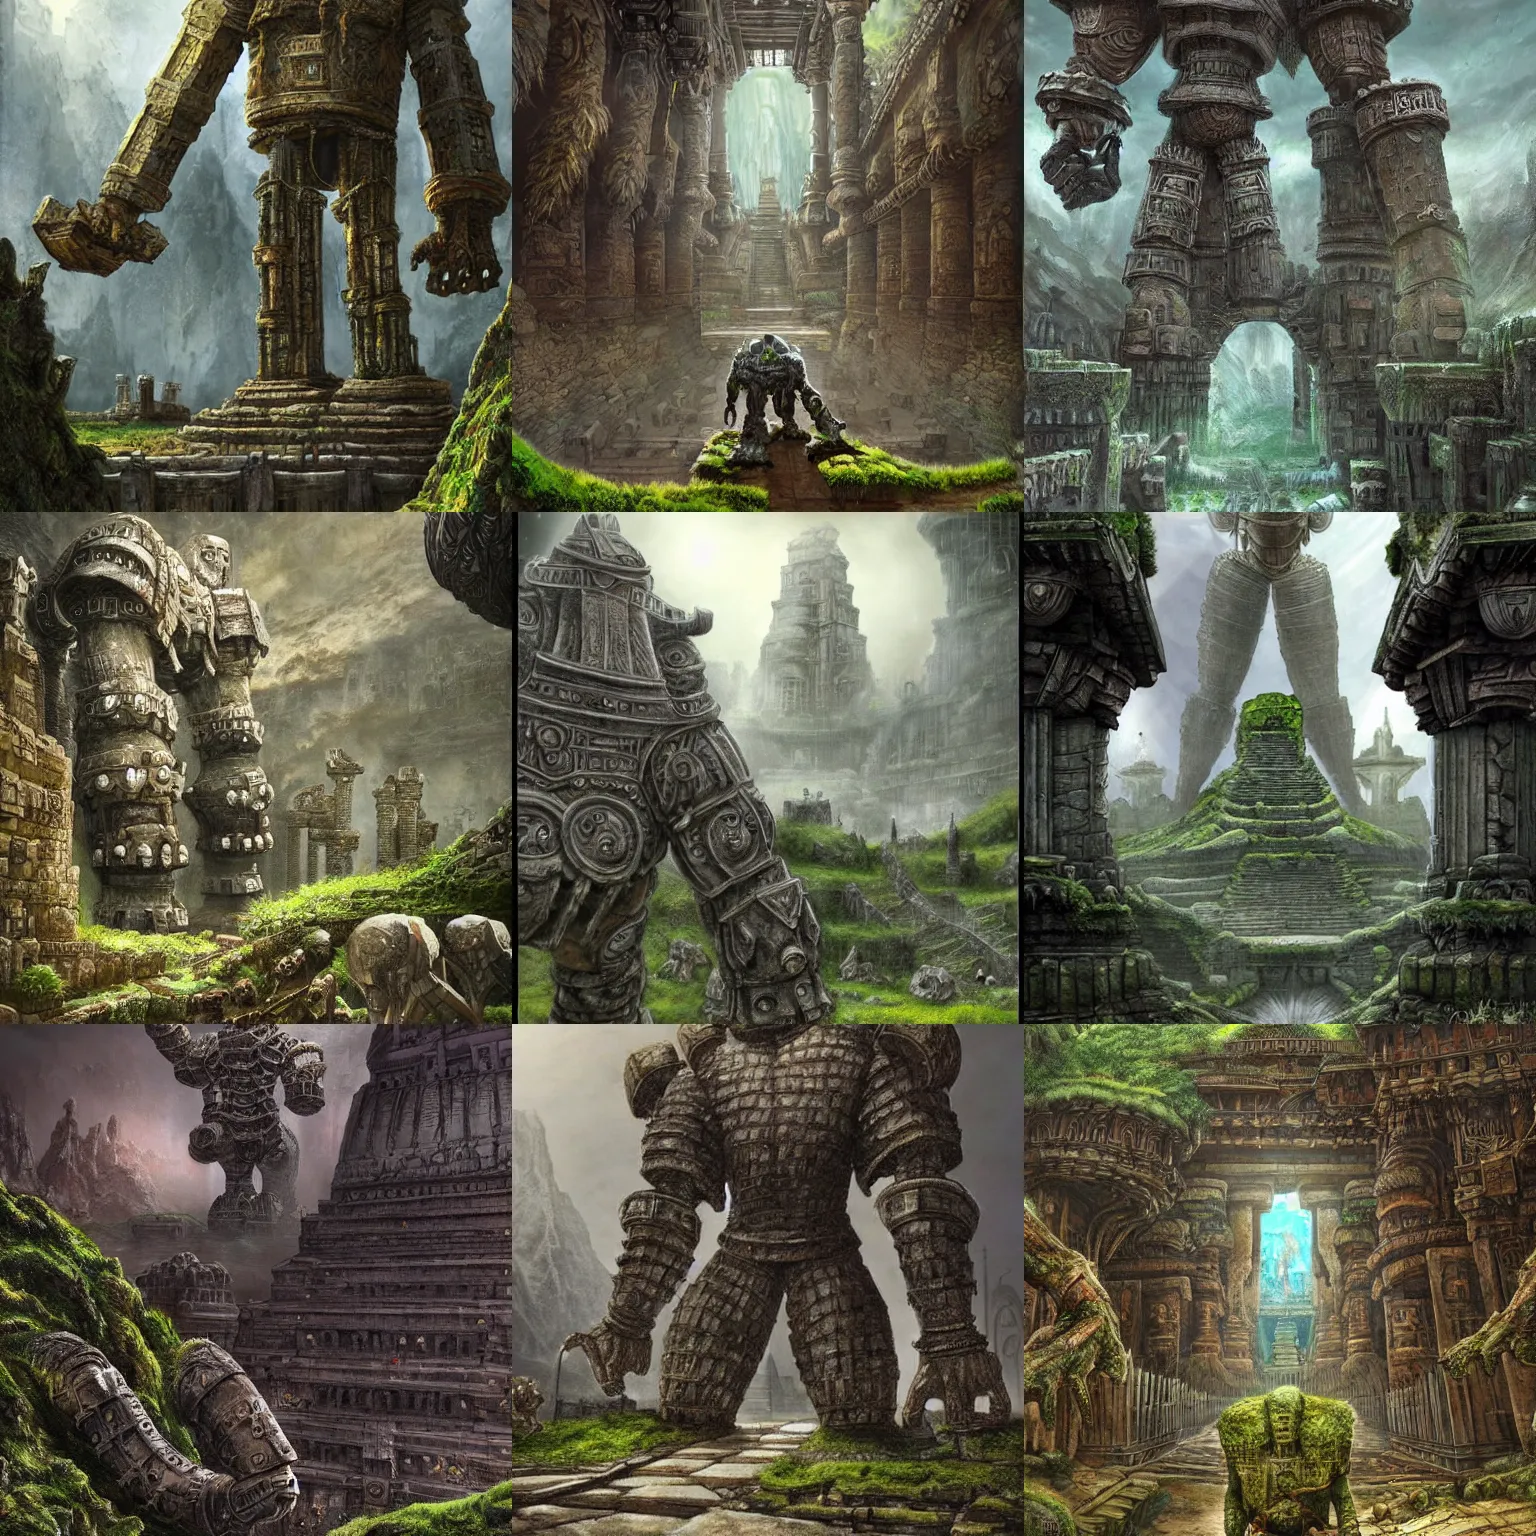 Prompt: massive iron golem guarding an ancient temple, epic fantasy art, highly detailed and intricate, underground, depth of view, crumbled bridge in the background, moss on the walls